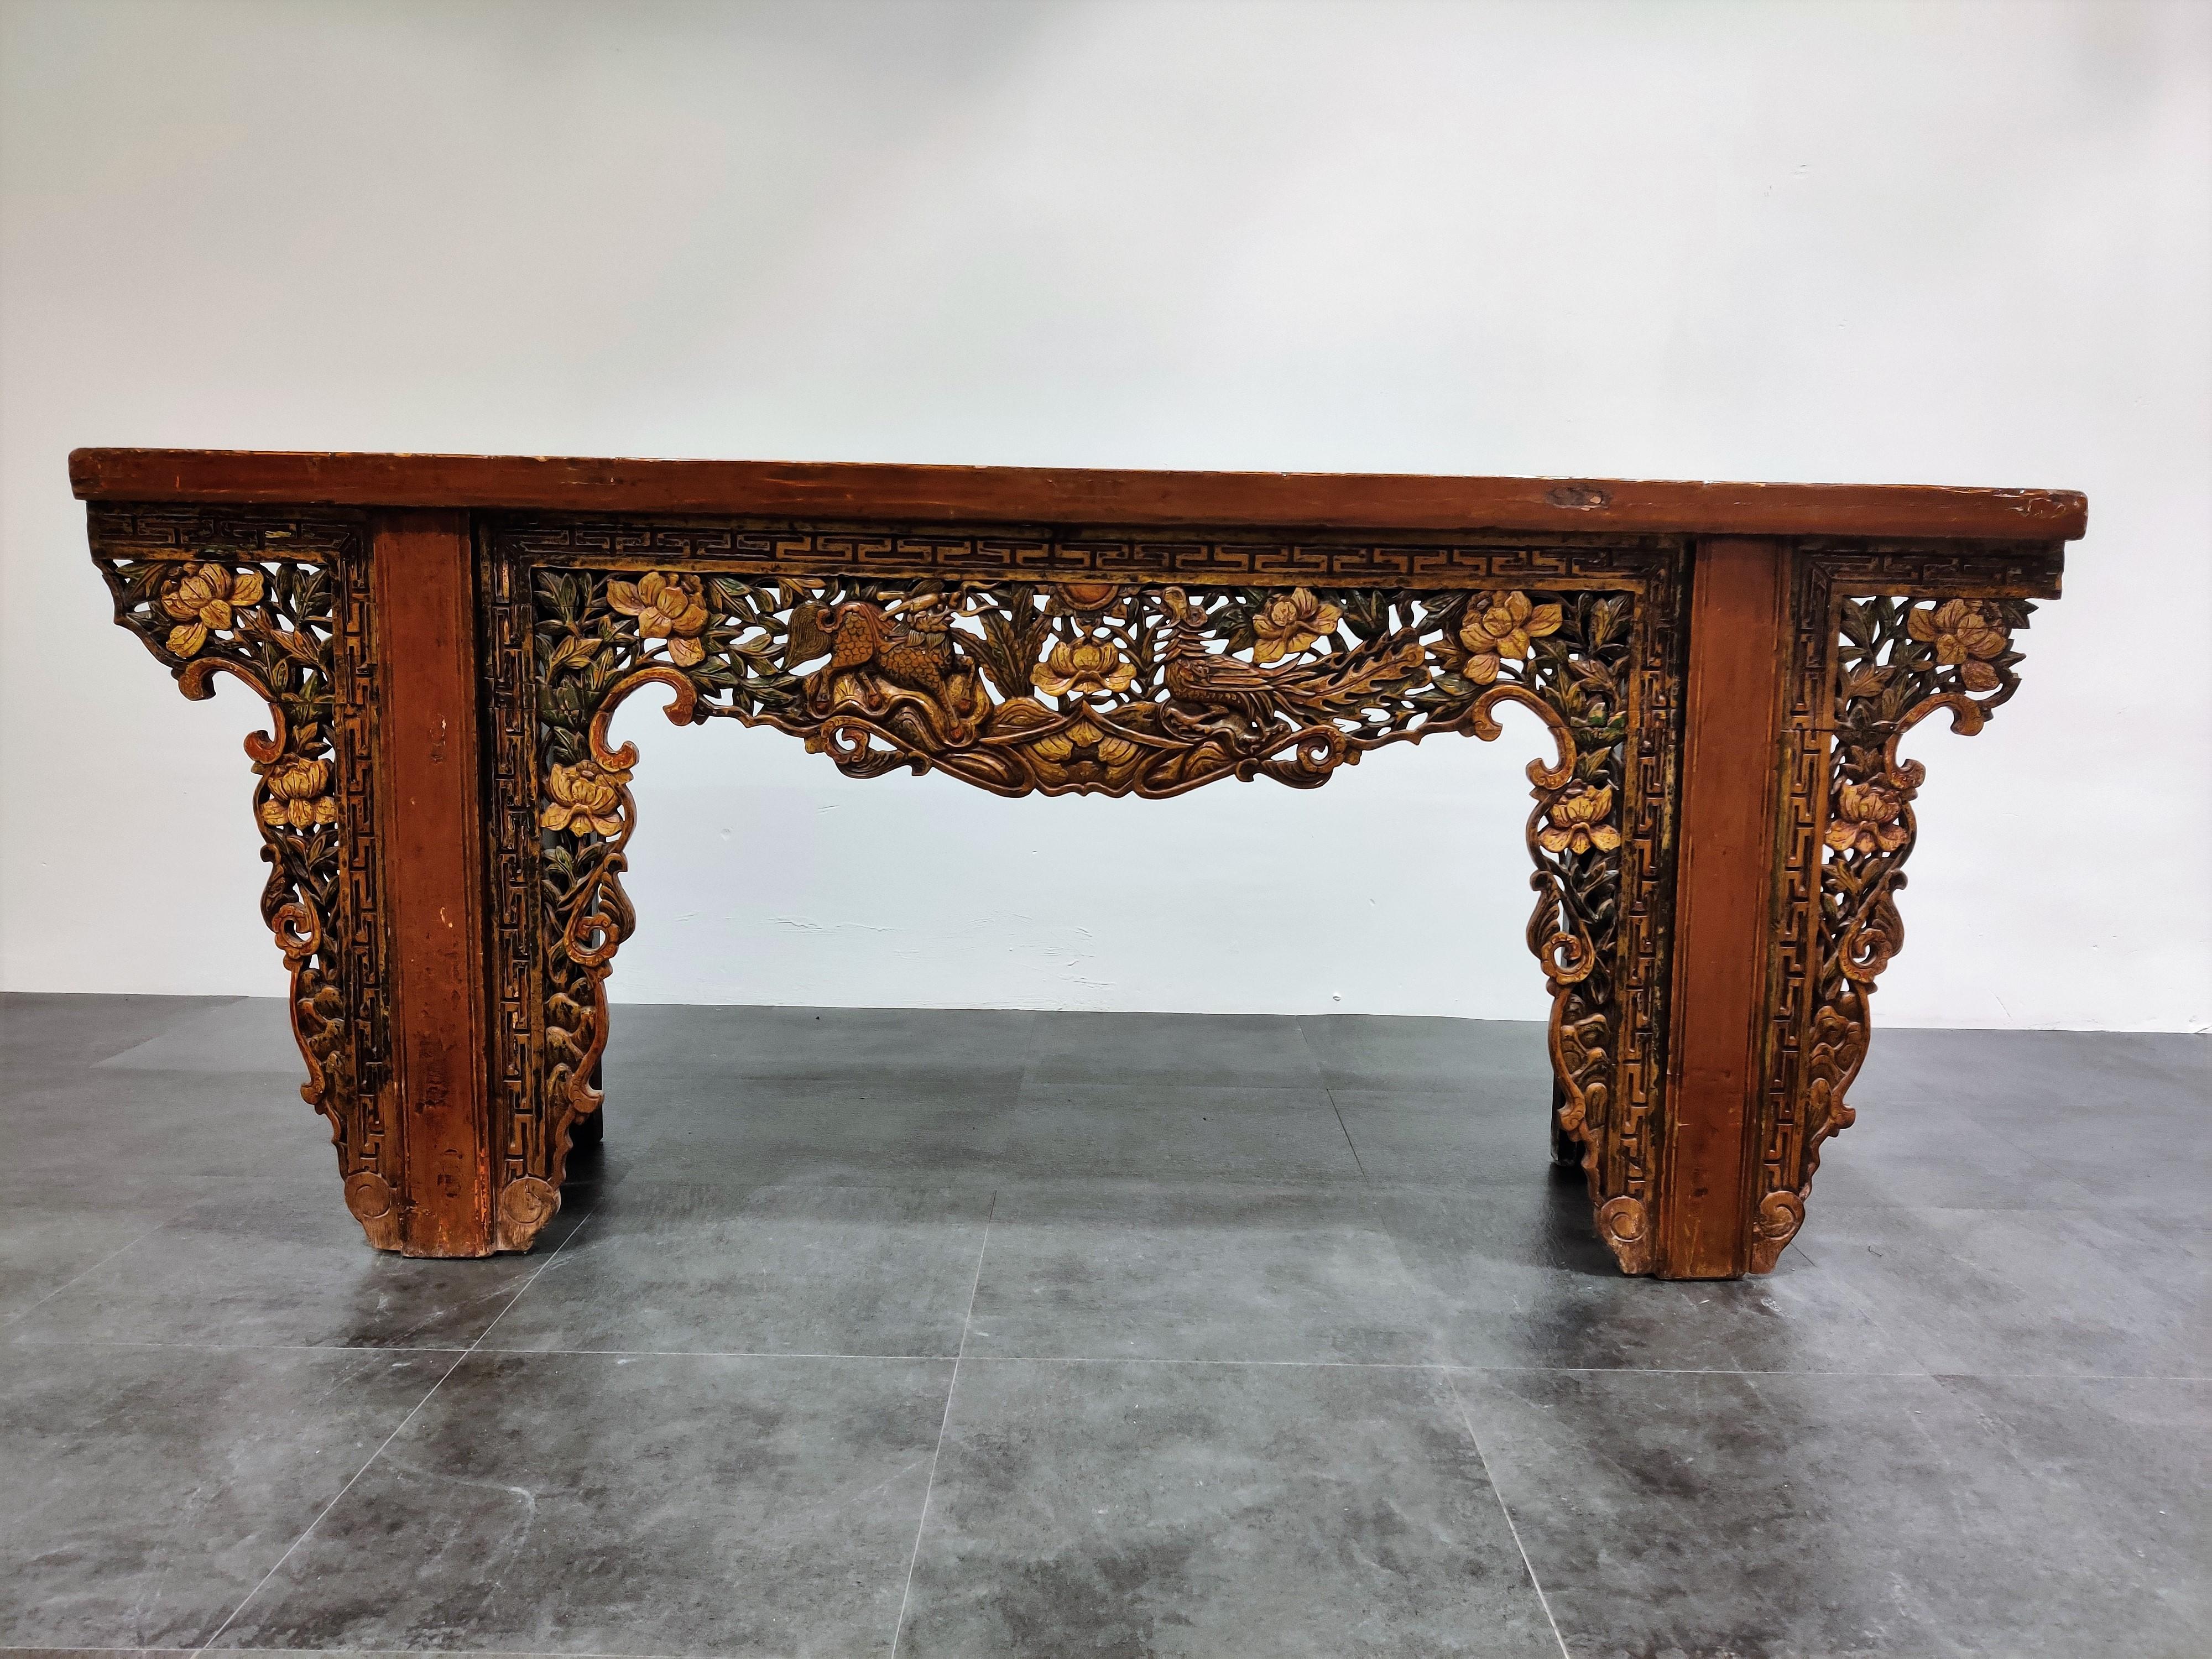 A Chinese altar table.

The oblong plank top above two massive end supports with a shaped apron and brackets elaborately carved with flowering lotus, a Kylin and Ho-Ho Bird.

The timber is difficult to discern, but likely to be a stained